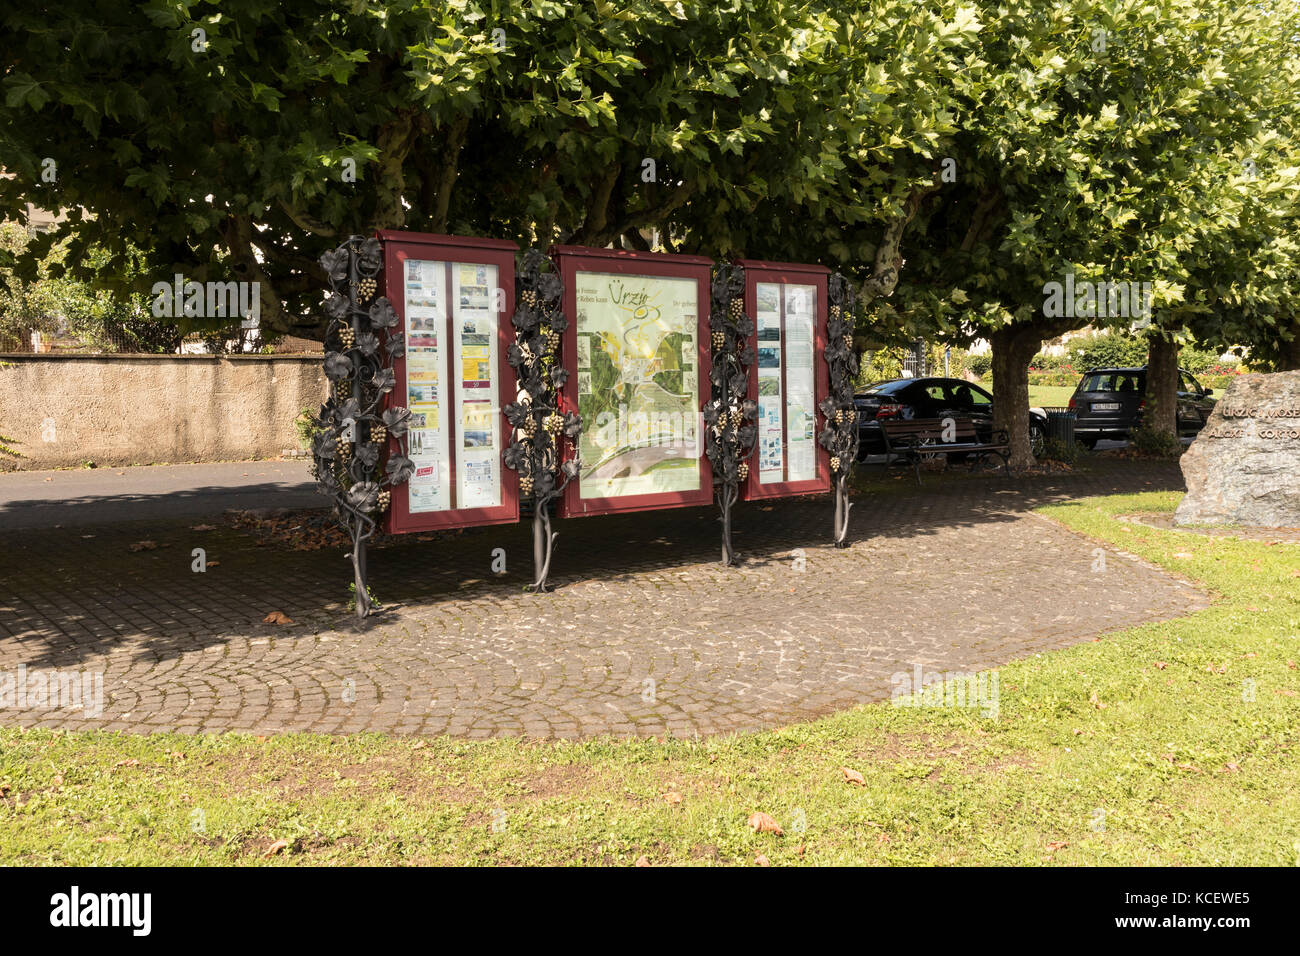 Tourist Information boards and plans in the town of Urzig, in the Mosel Valley, Germany Stock Photo